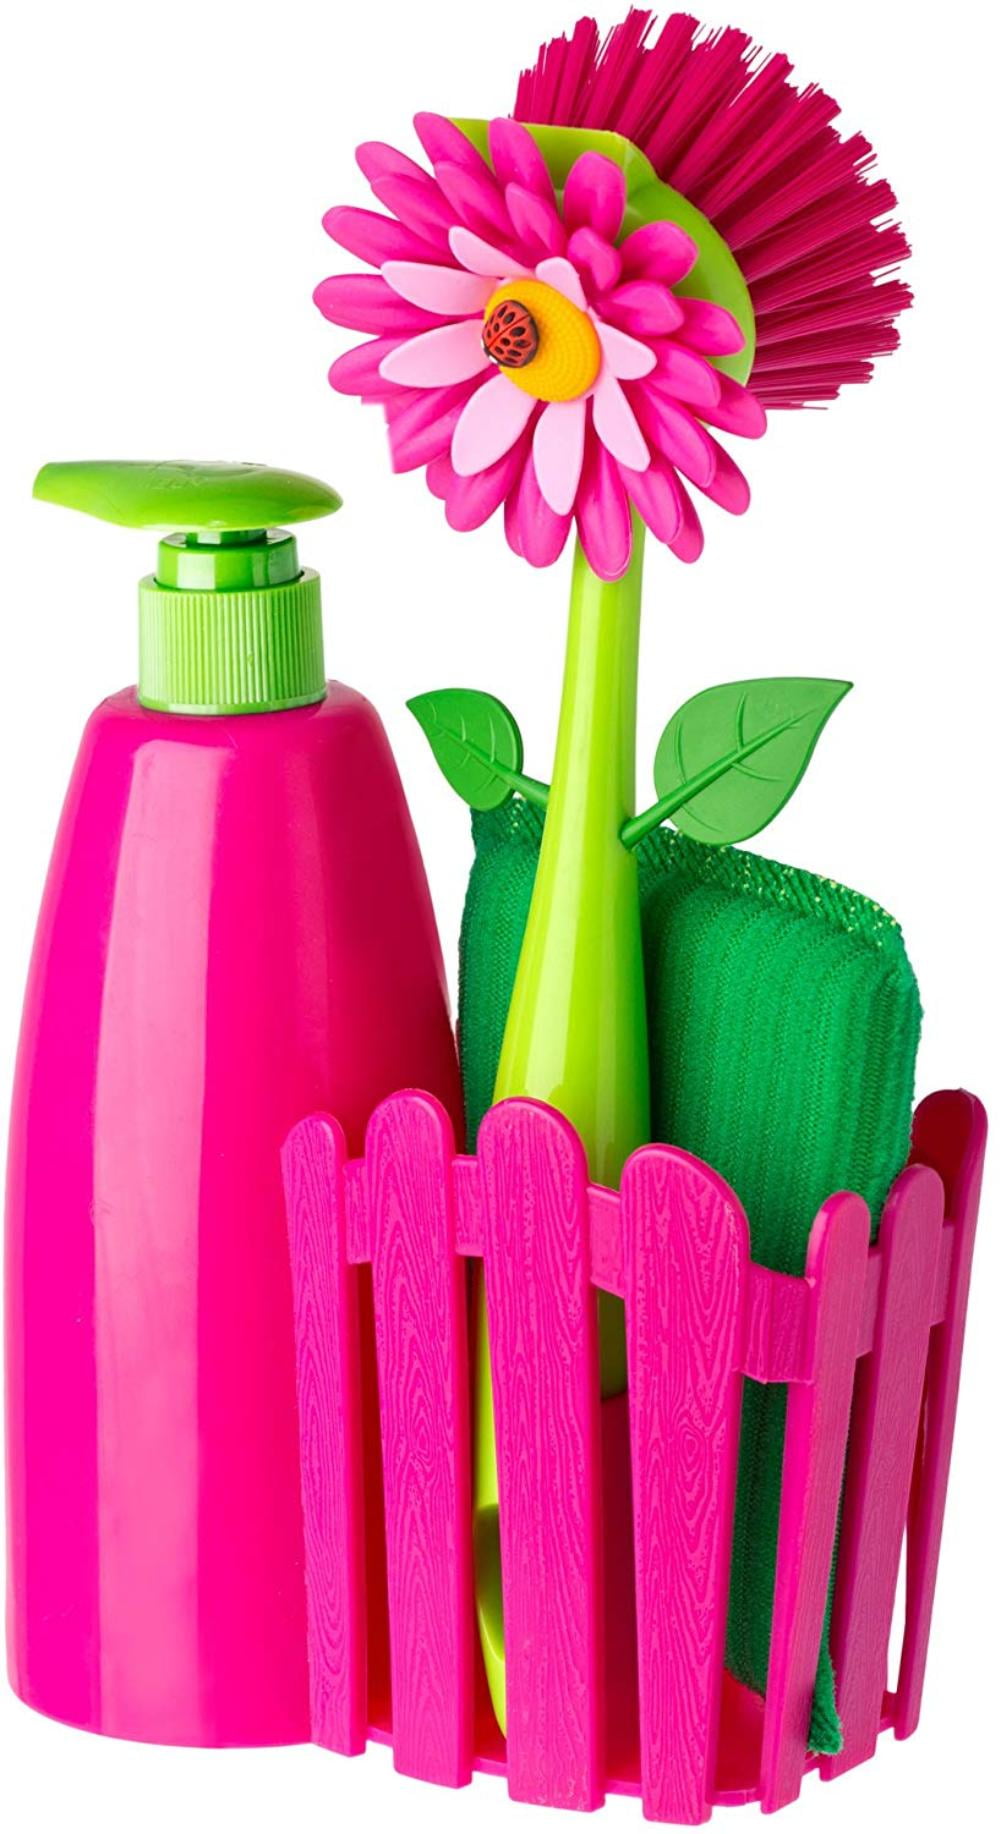 10-1/2-Inches Pink Vigar Flower Power Pink Sink Side Set with Soap Dispenser Green